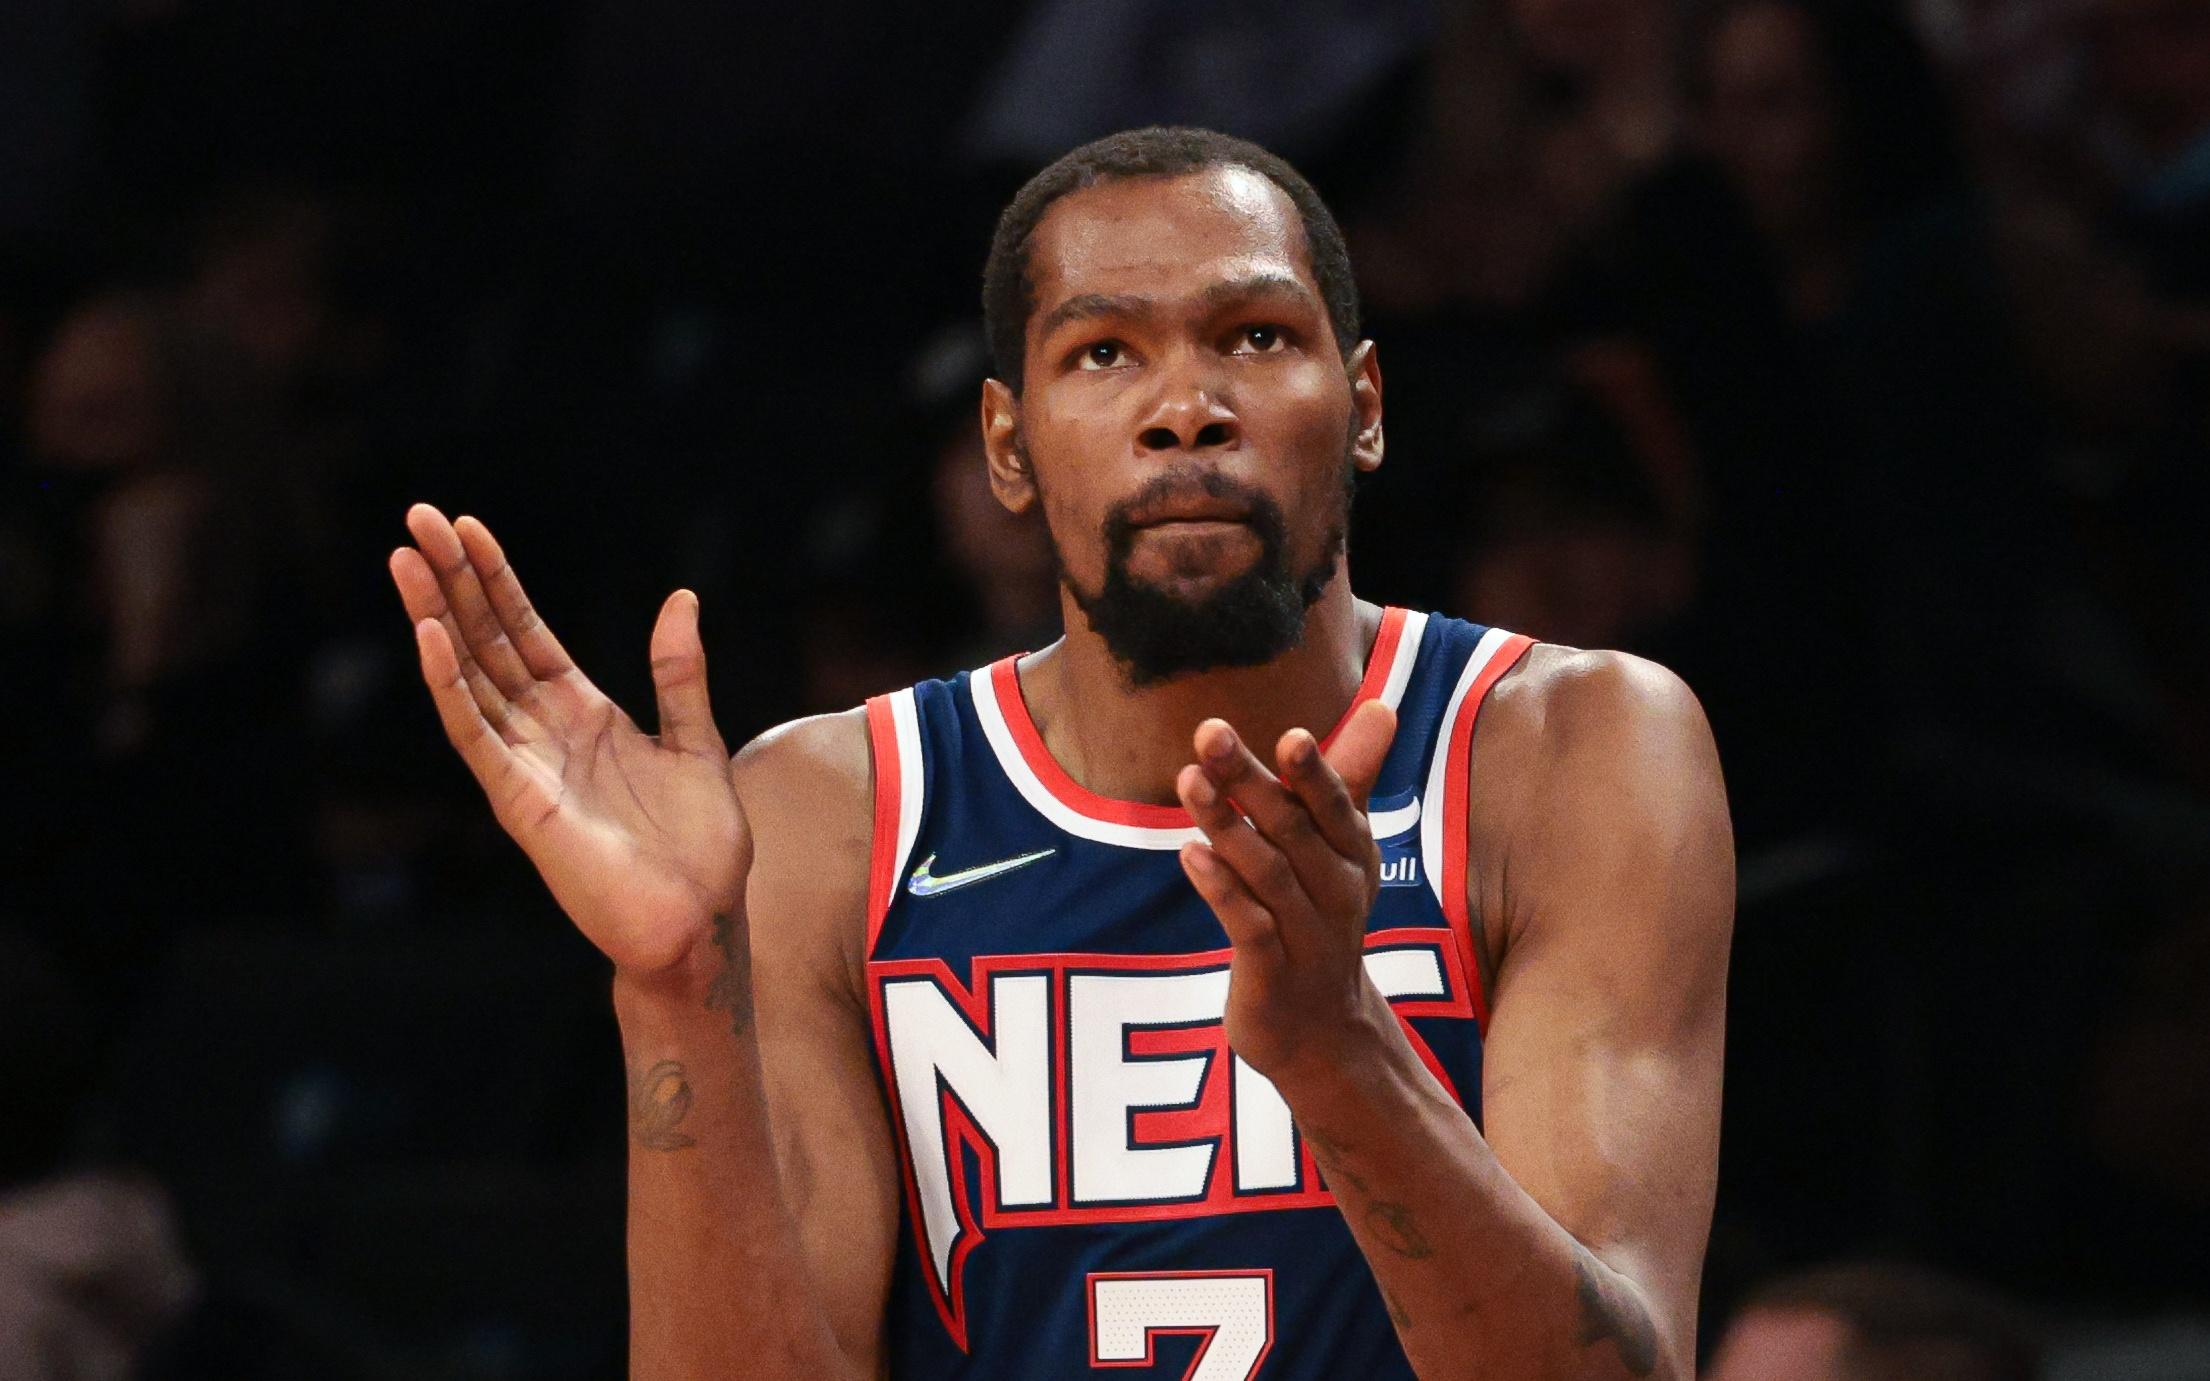 Dec 16, 2021; Brooklyn, New York, USA; Brooklyn Nets forward Kevin Durant (7) reacts during the first half against the Philadelphia 76ers at Barclays Center. Mandatory Credit: Vincent Carchietta-USA TODAY Sports / © Vincent Carchietta-USA TODAY Sports